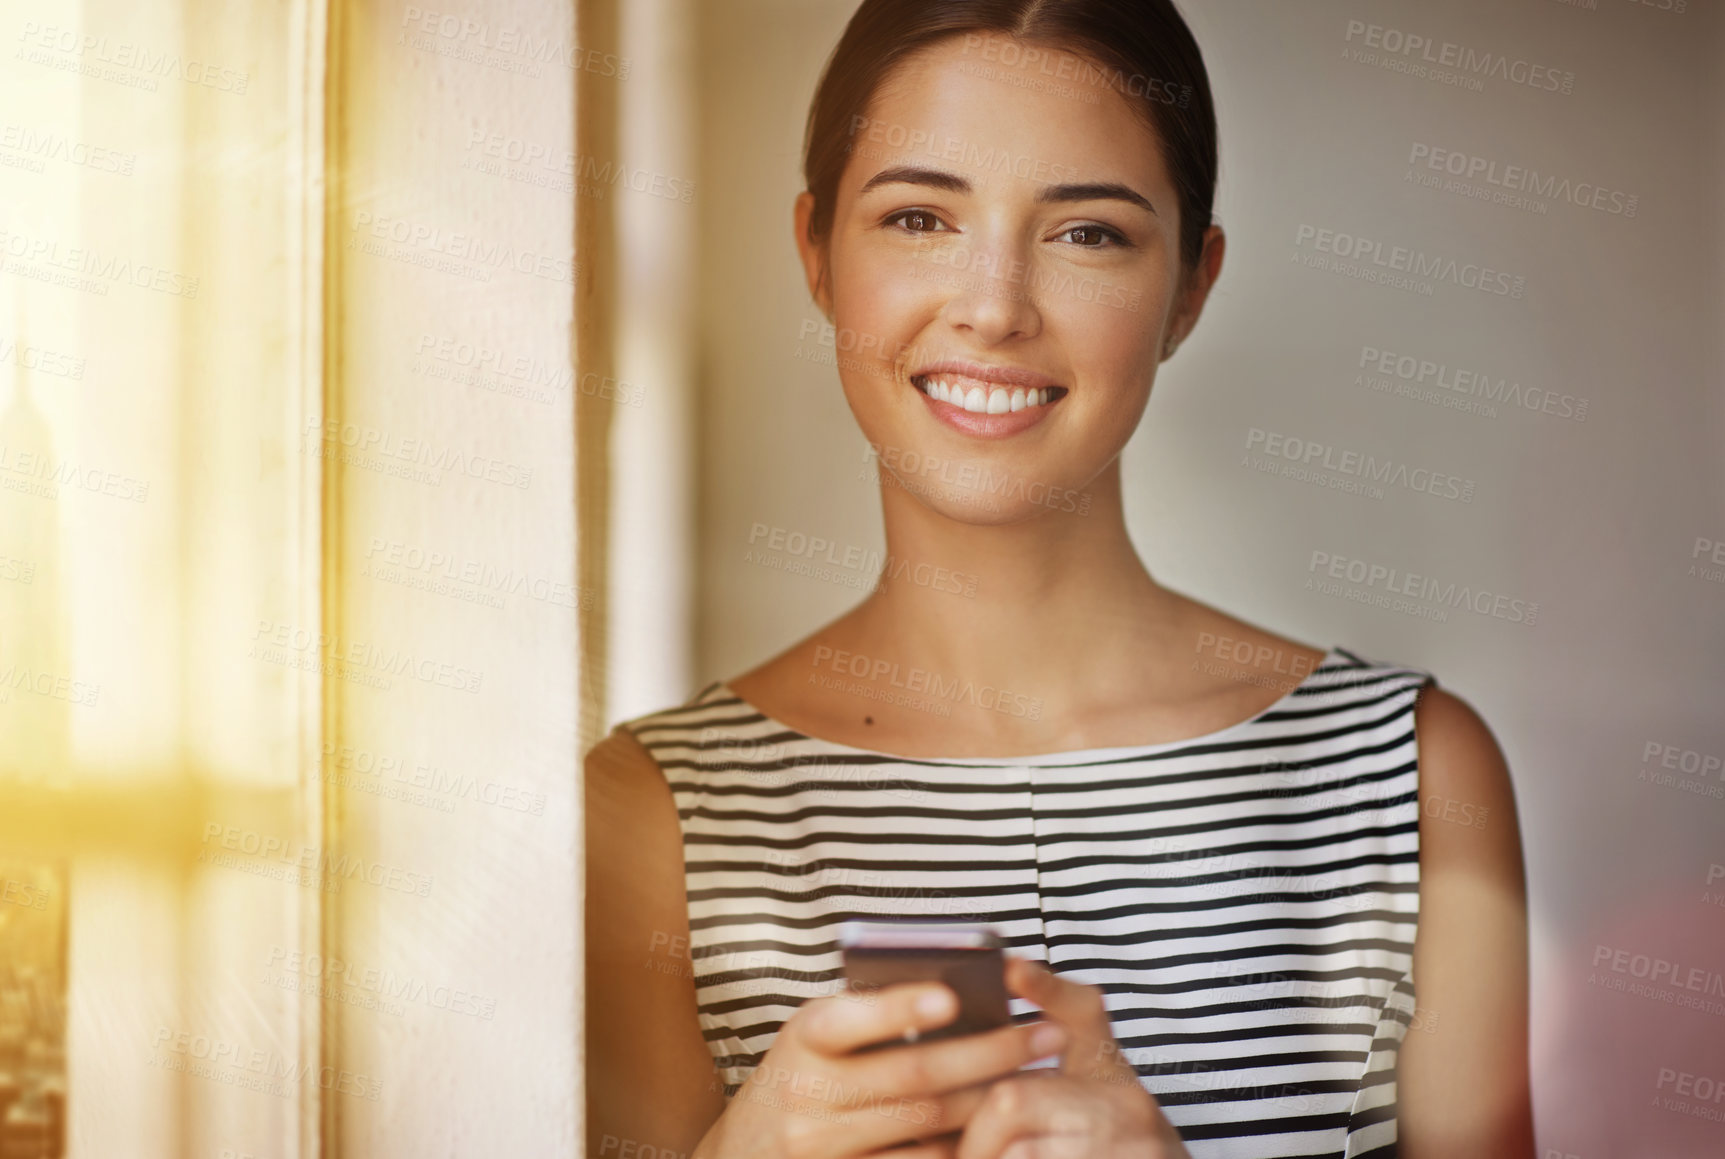 Buy stock photo Cropped portrait of a businesswoman sending a text in her office